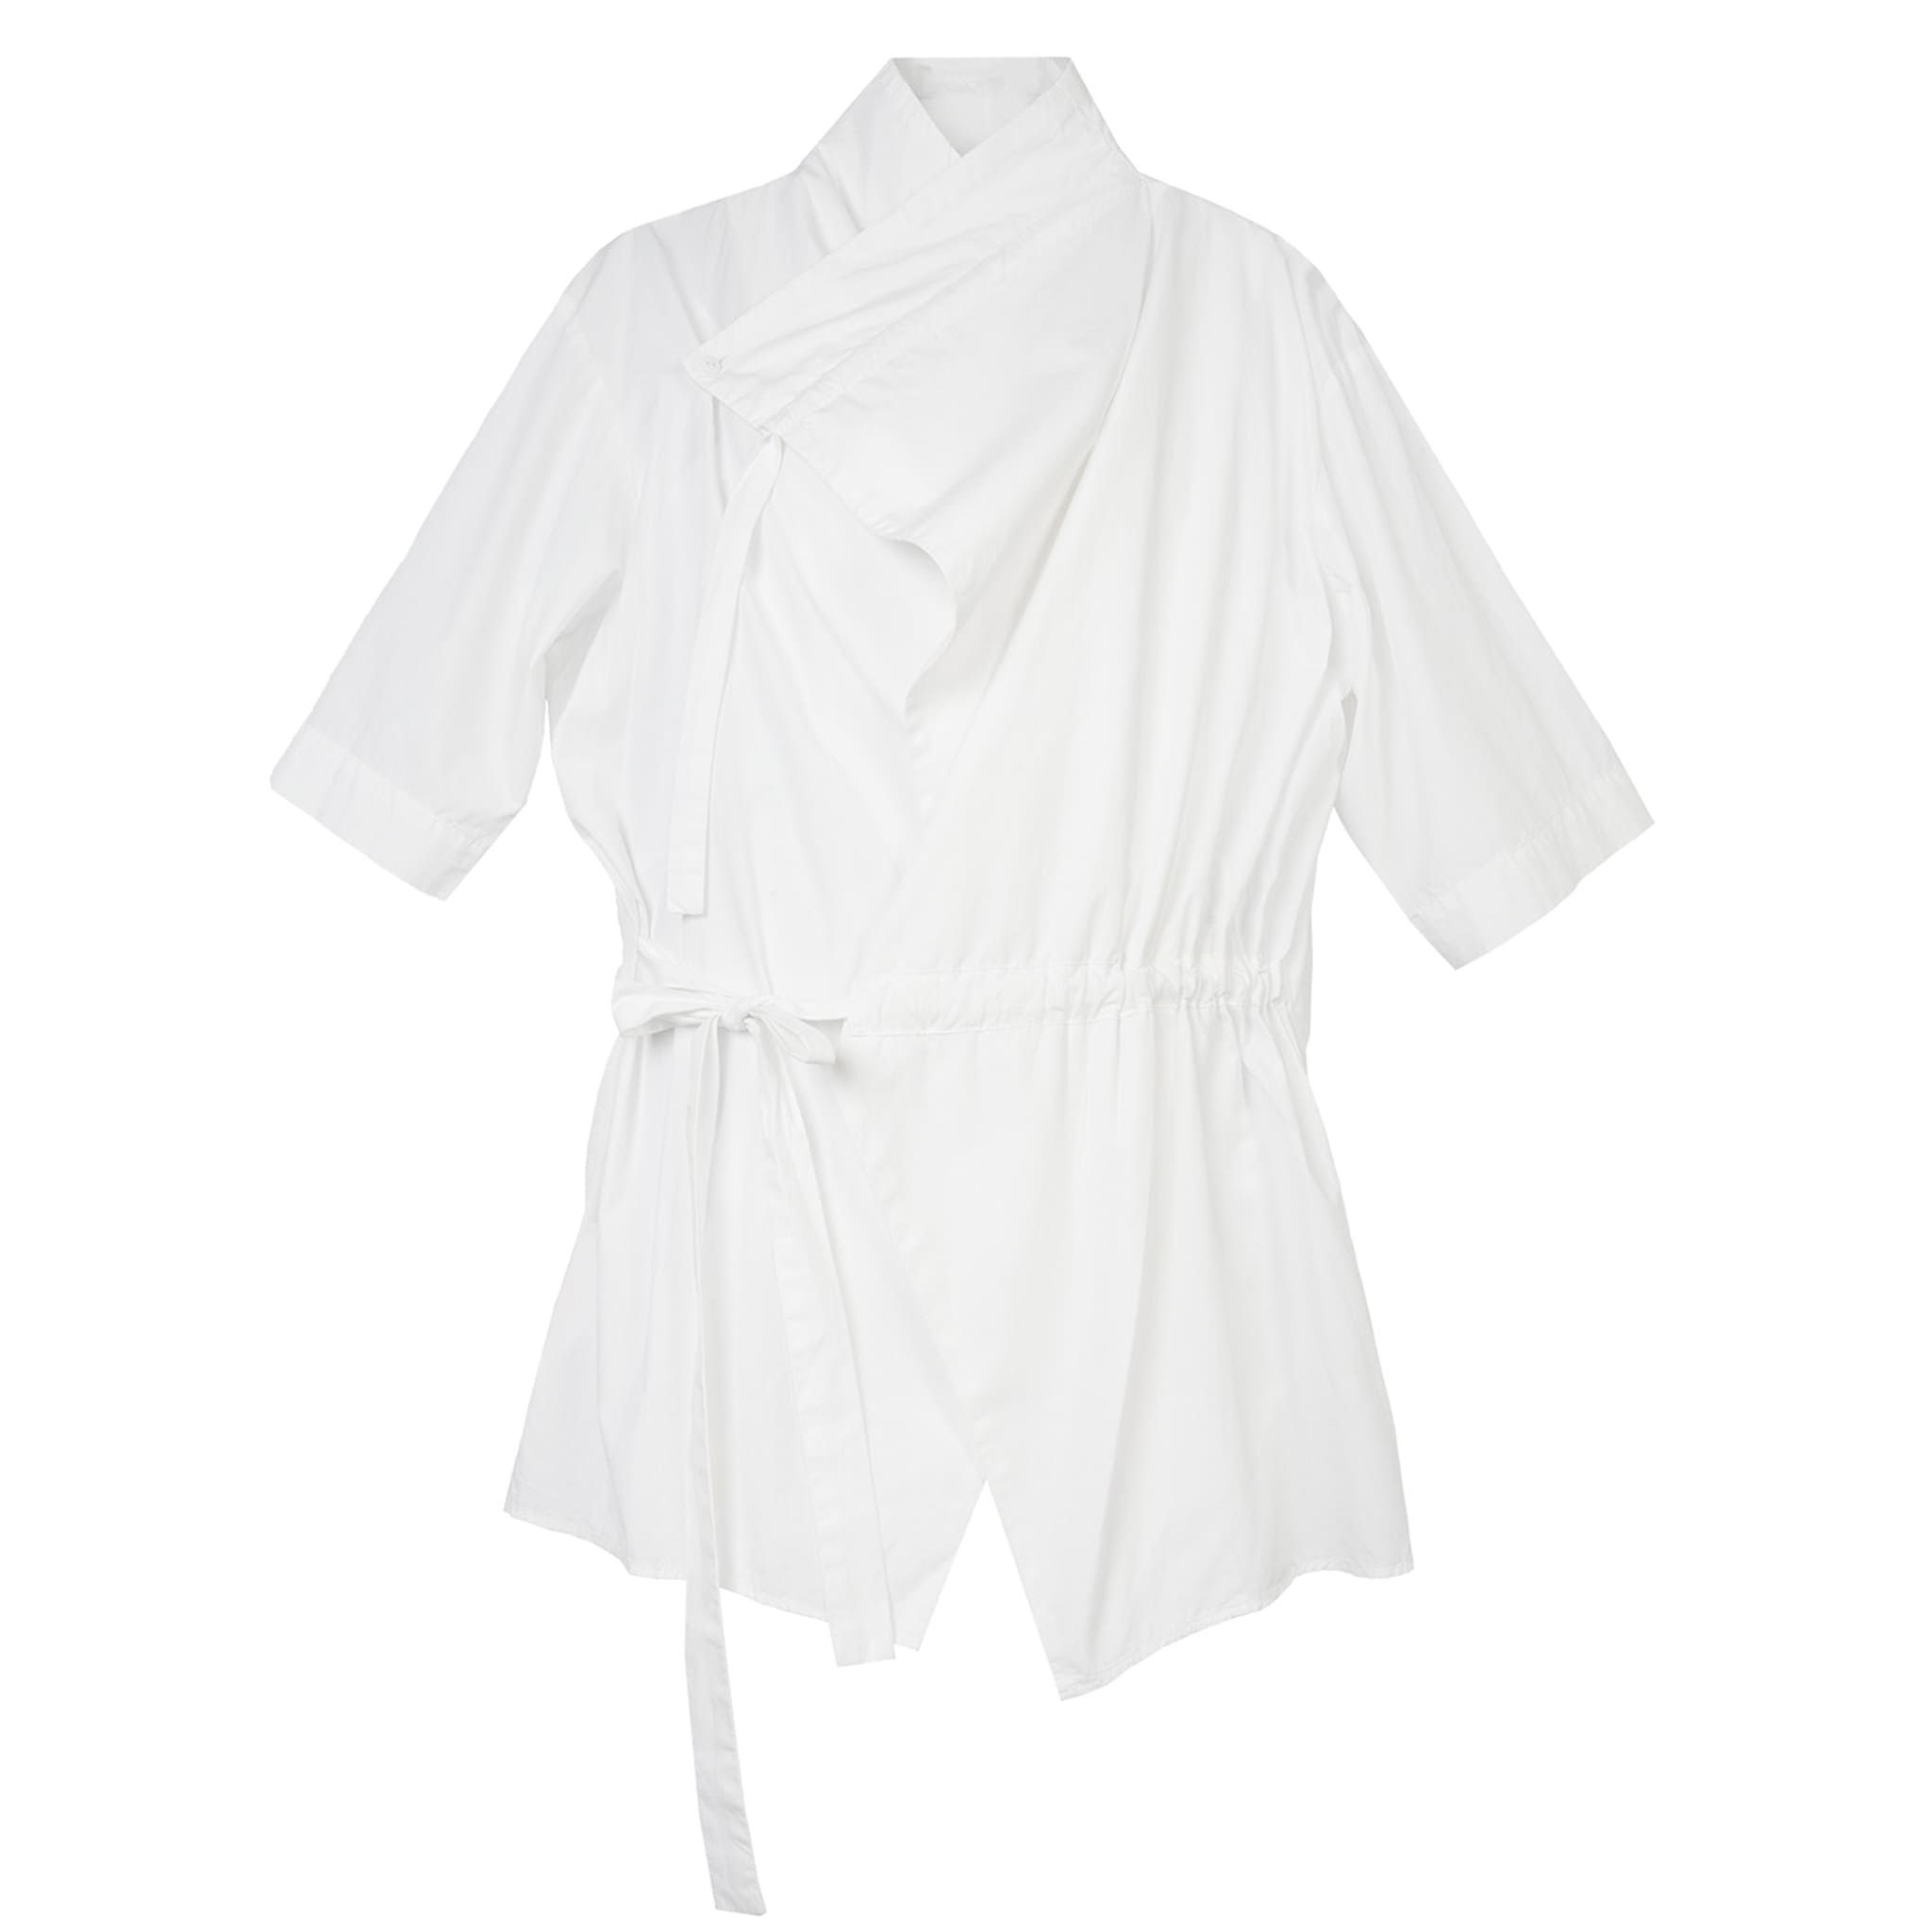 Kimono Style Deconstructed Shirt With Short Sleeves